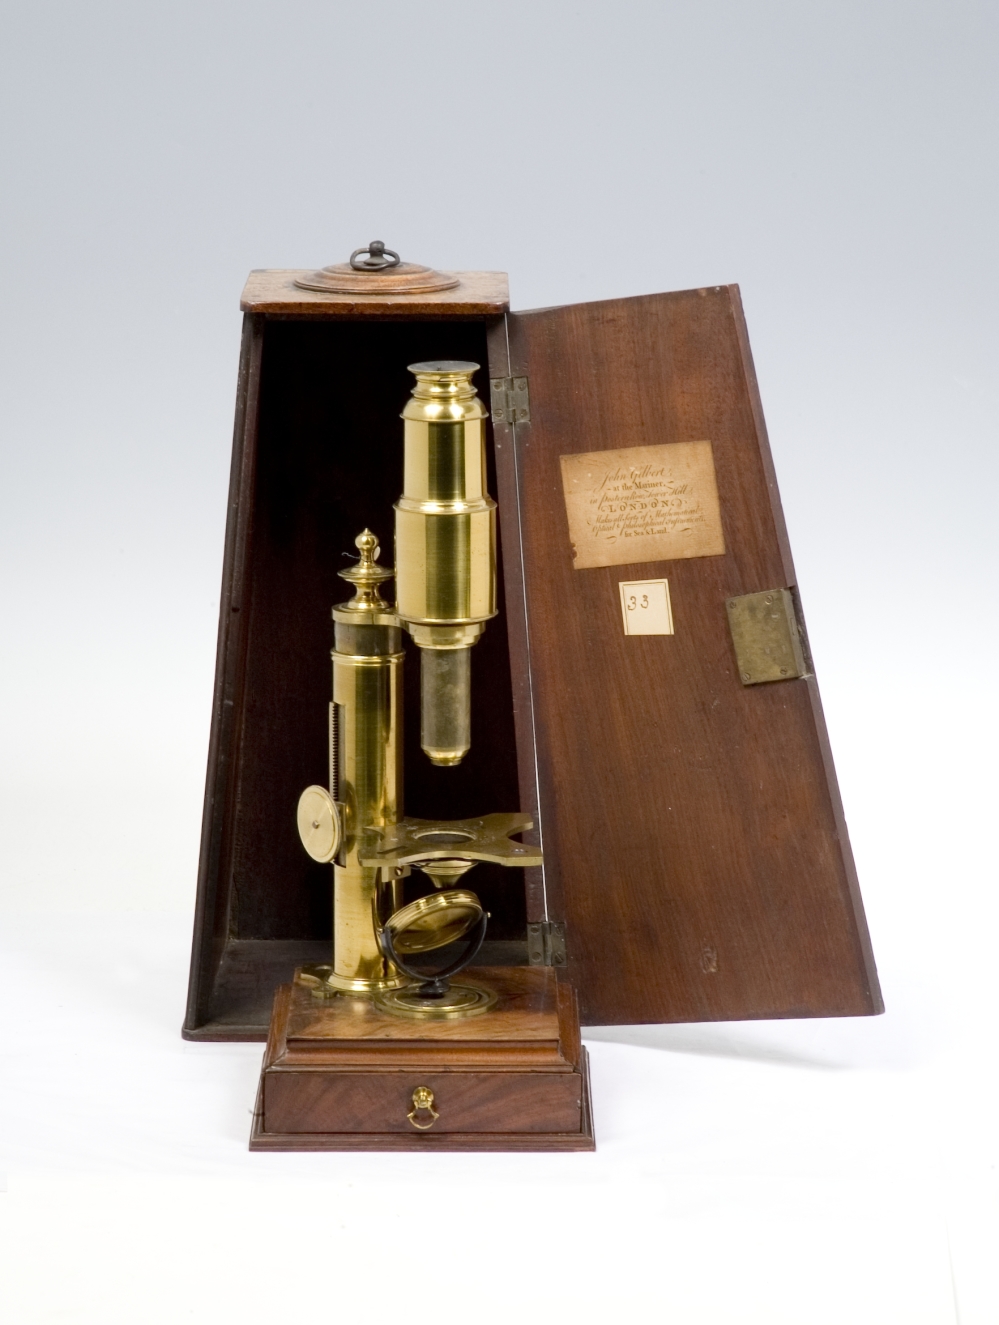 preview image for Cuff-Type Compound Microscope in Case with Accessories, by John Gilbert, English, c. 1765